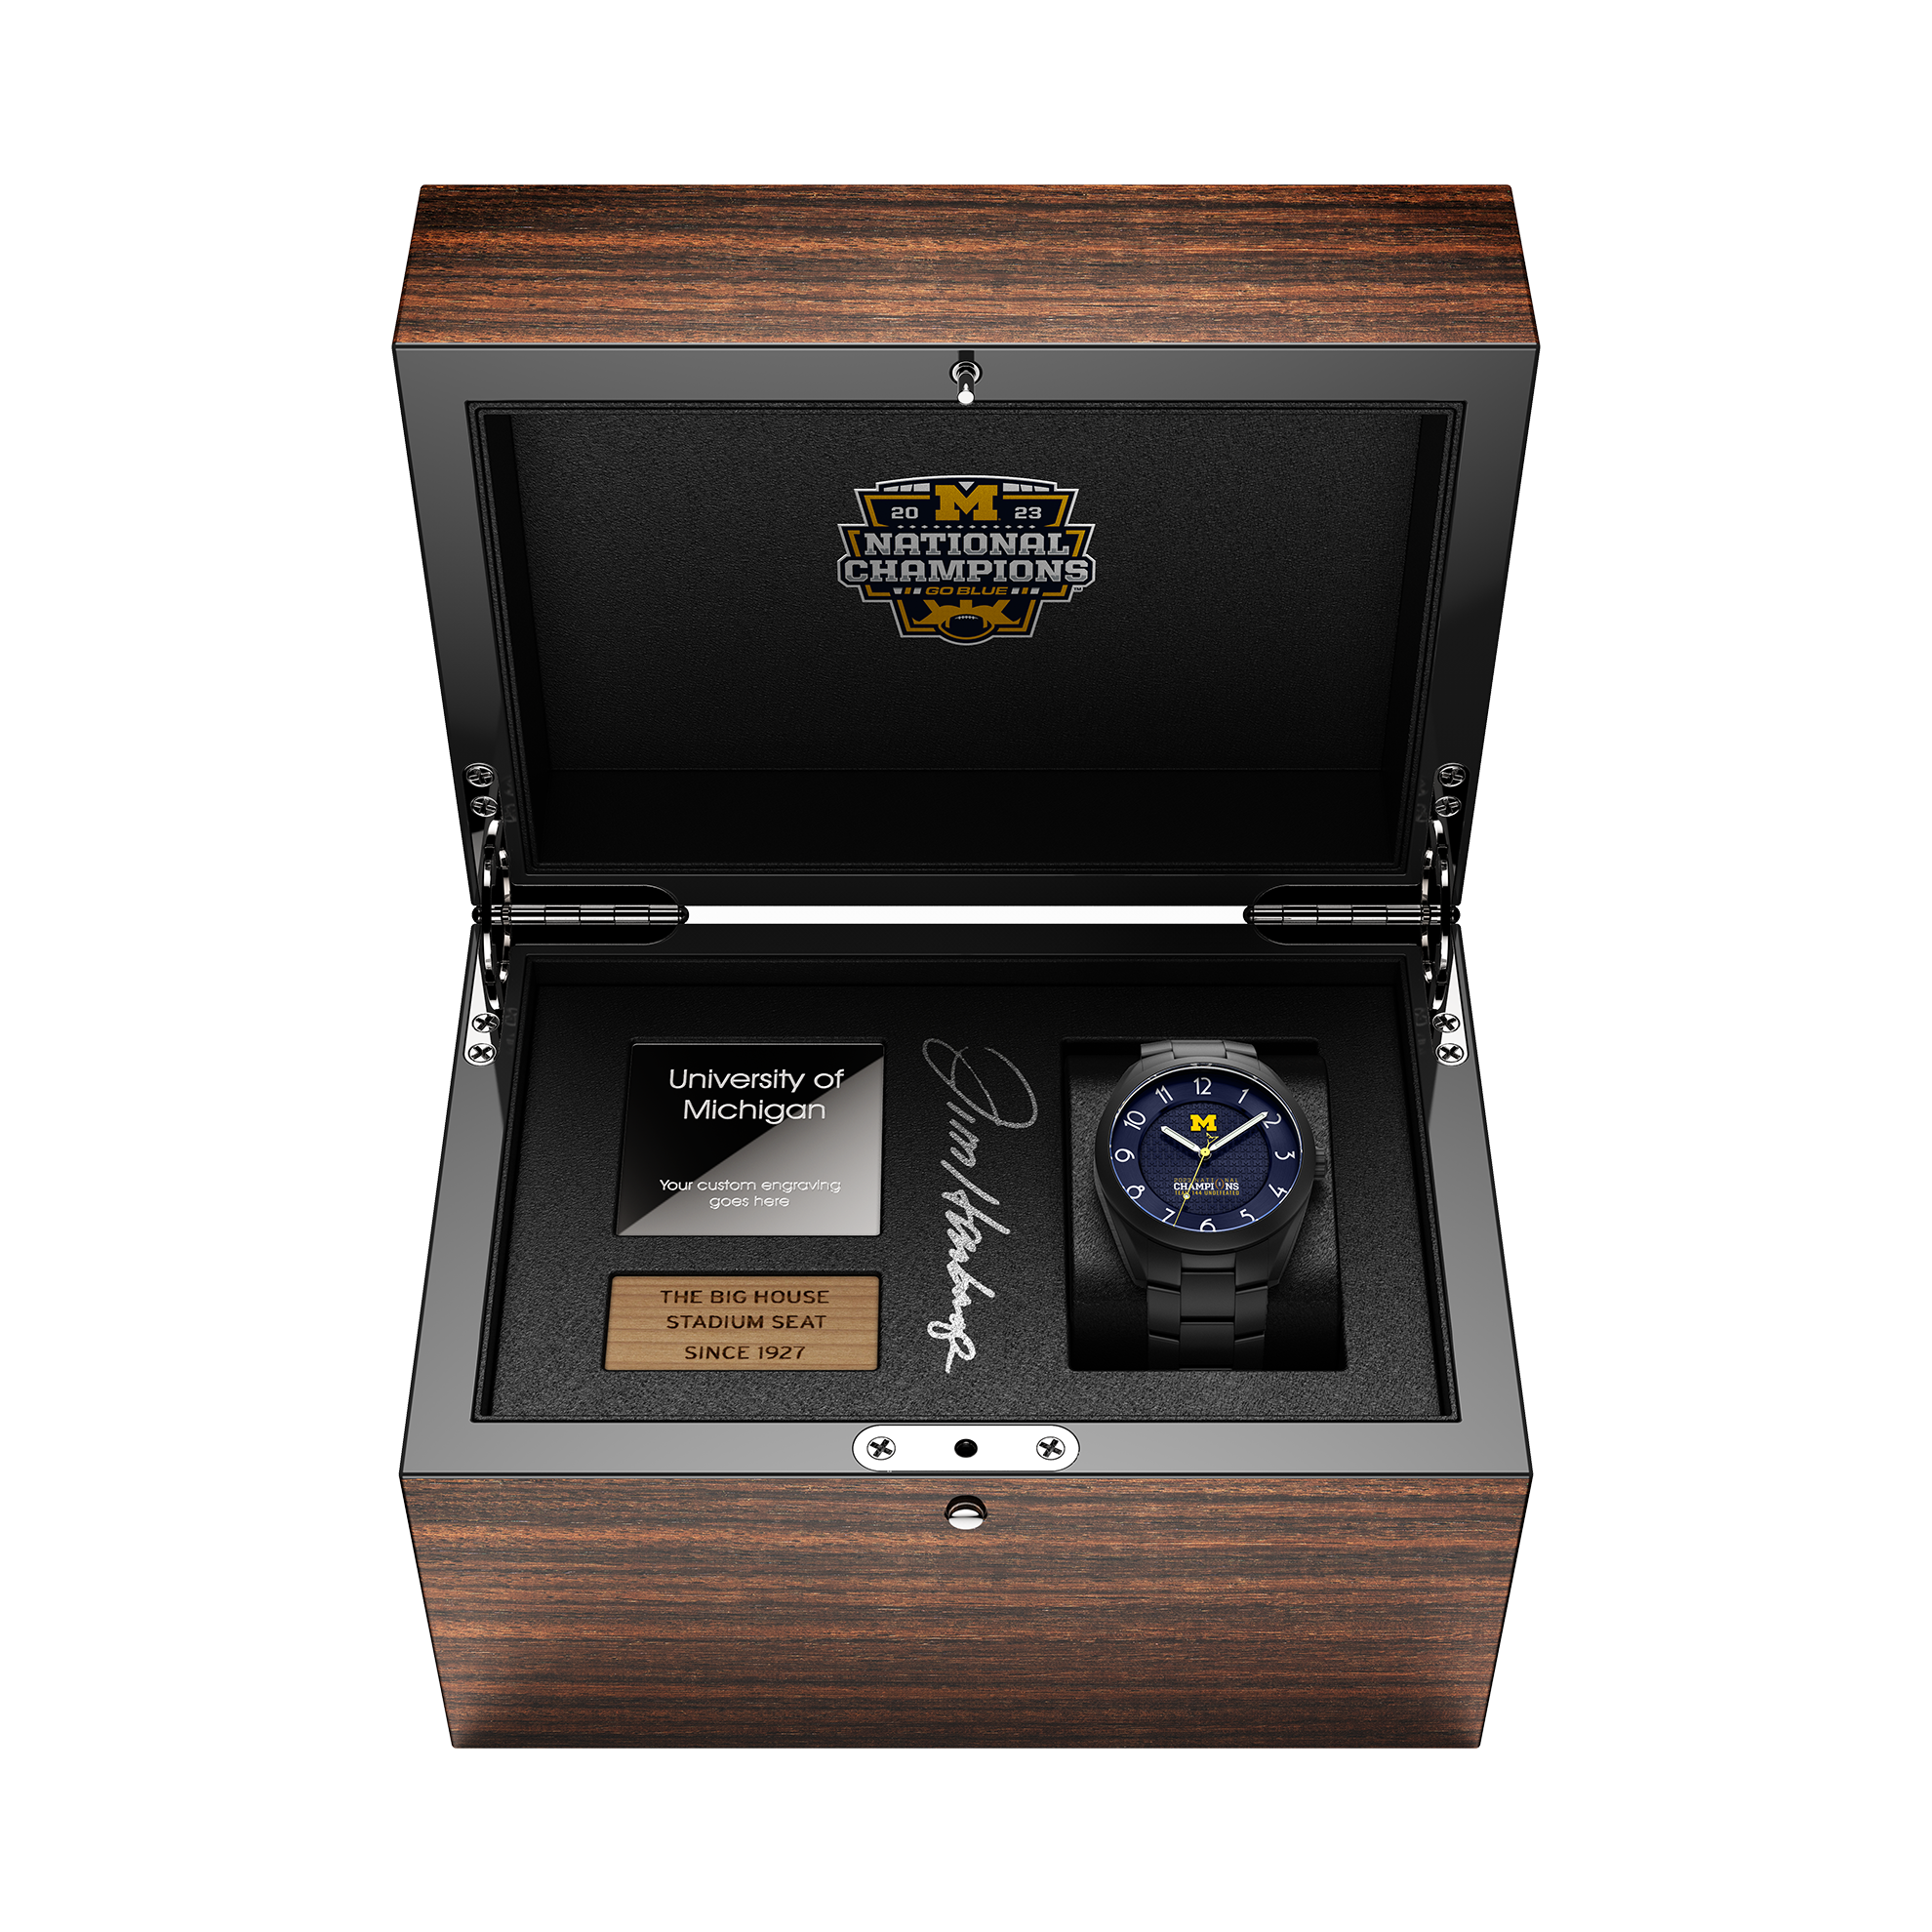 2023 Michigan National Champions Jim Harbaugh autographed display box with the Kairos II Swiss made automatic watch in black PVD and a piece of wood from The Big House stadium seats originally installed in 1927.